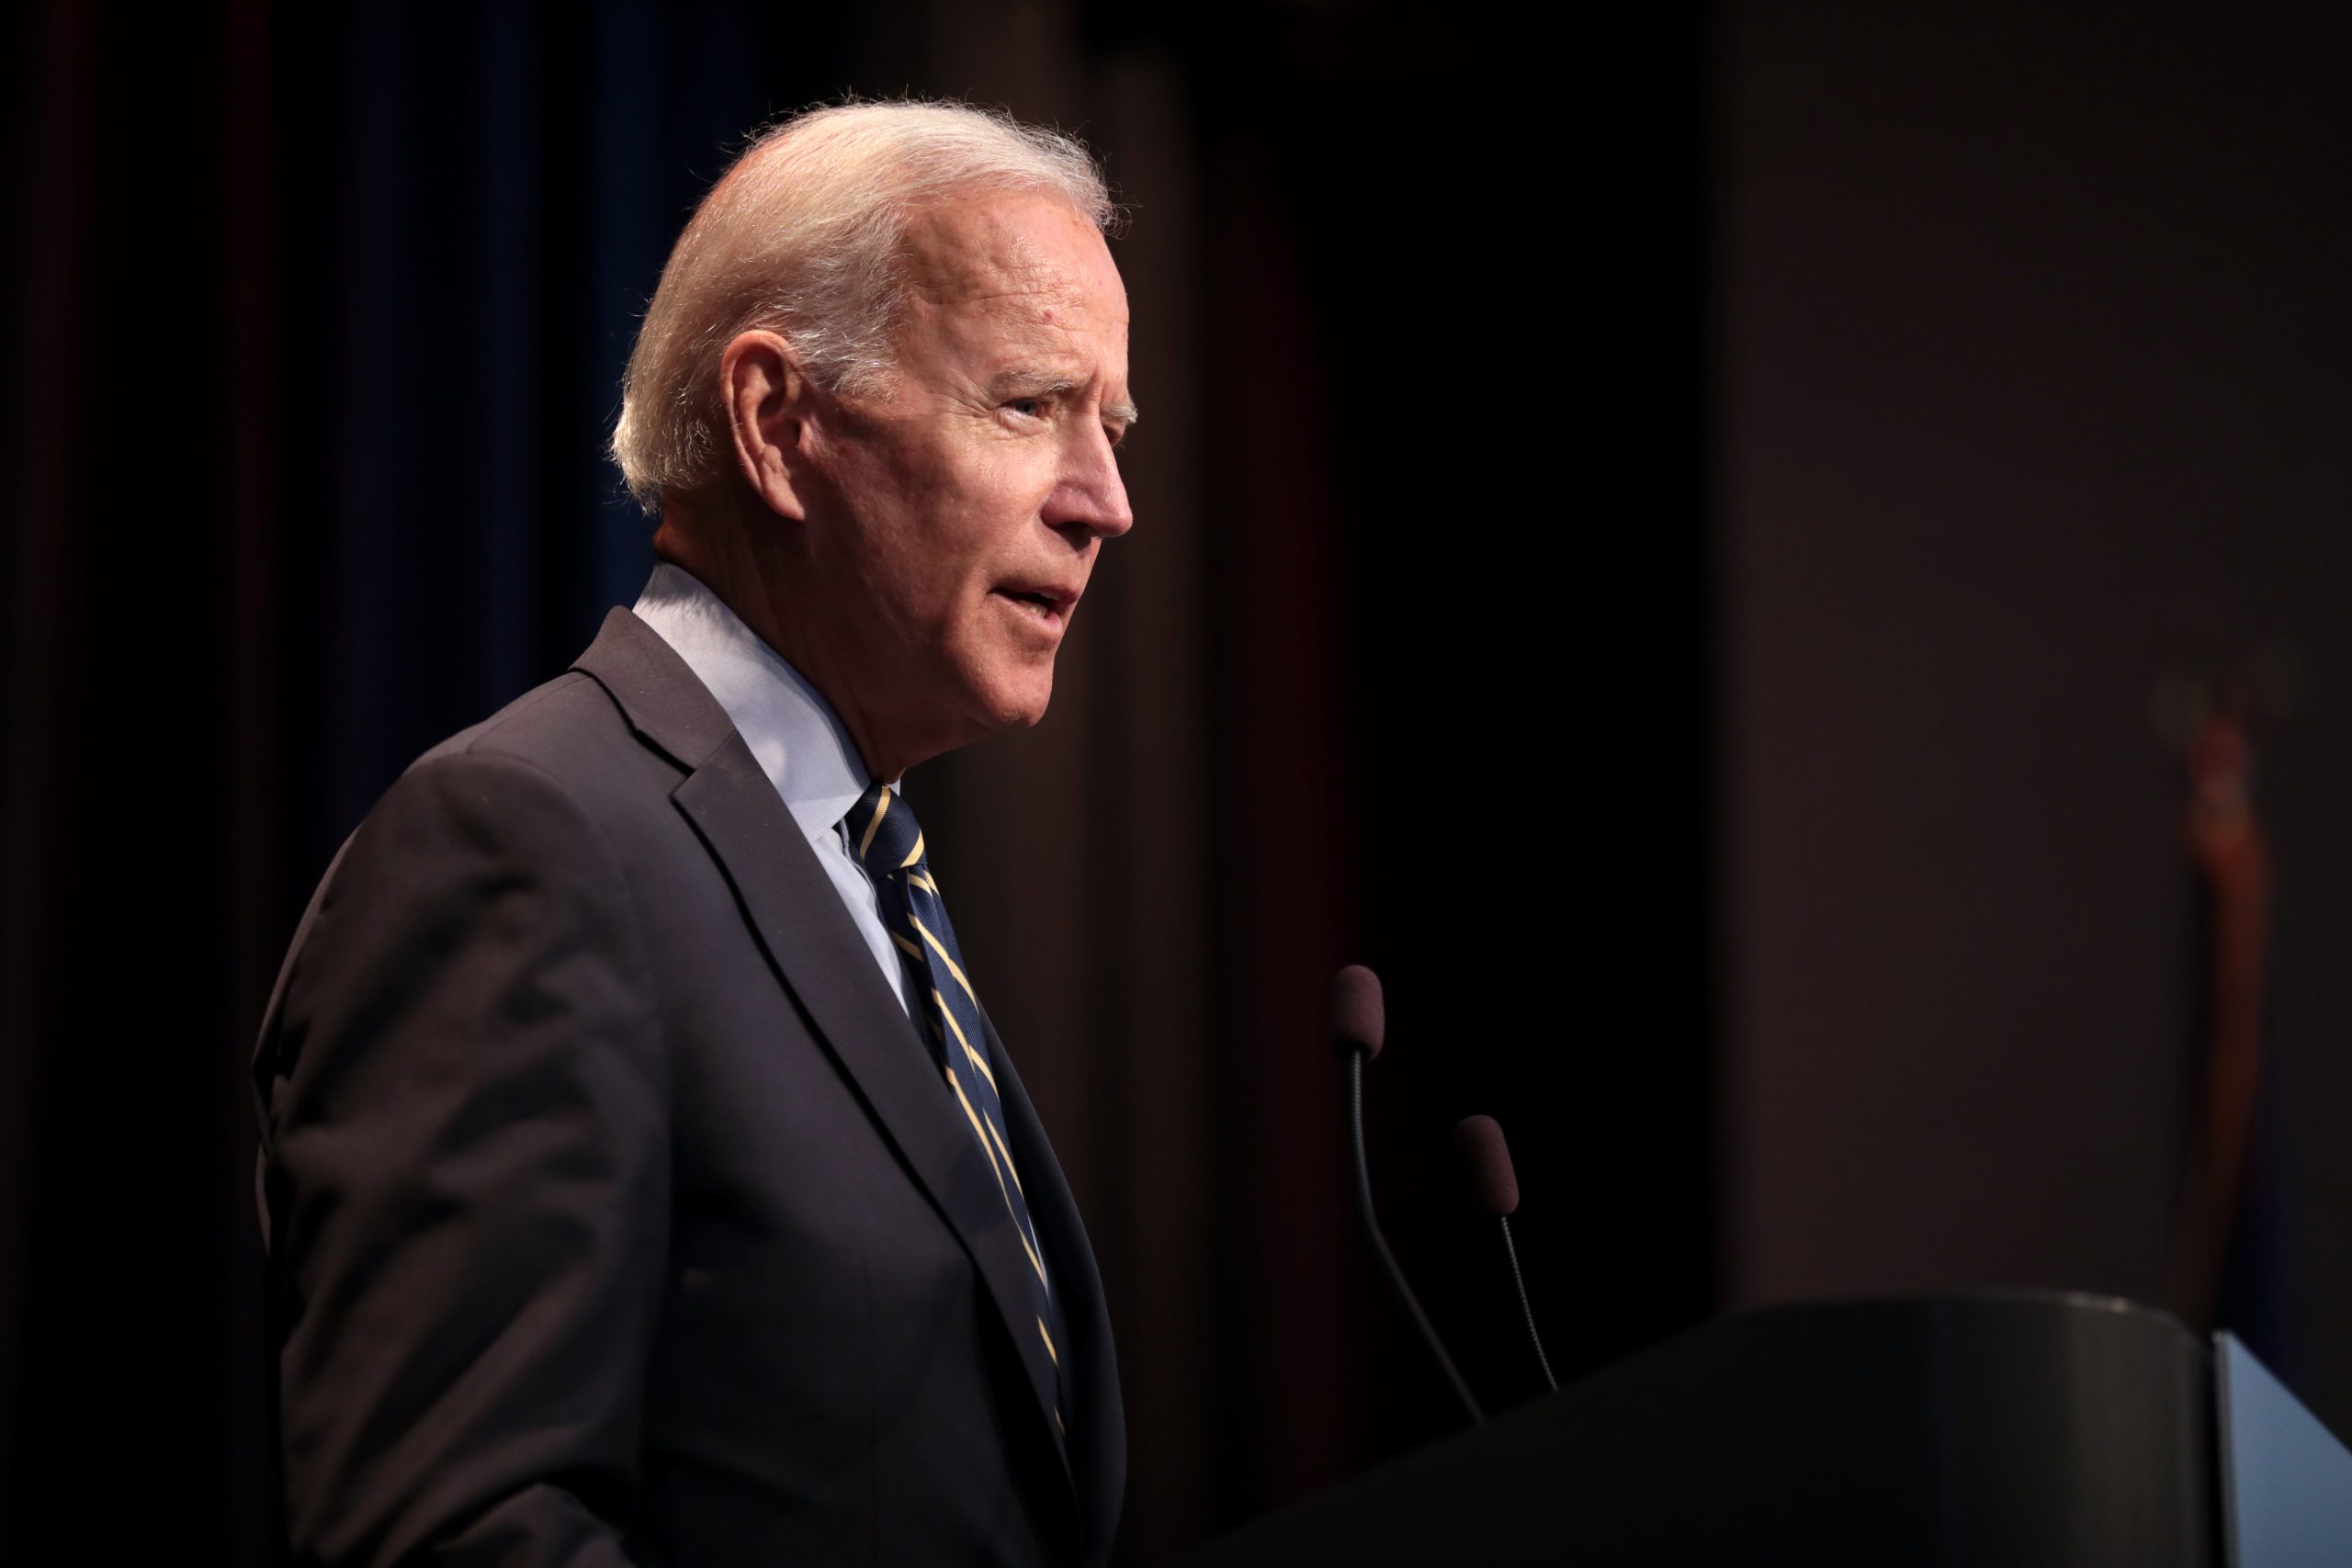 Biden Refuses To Give Position On “Court Packing”